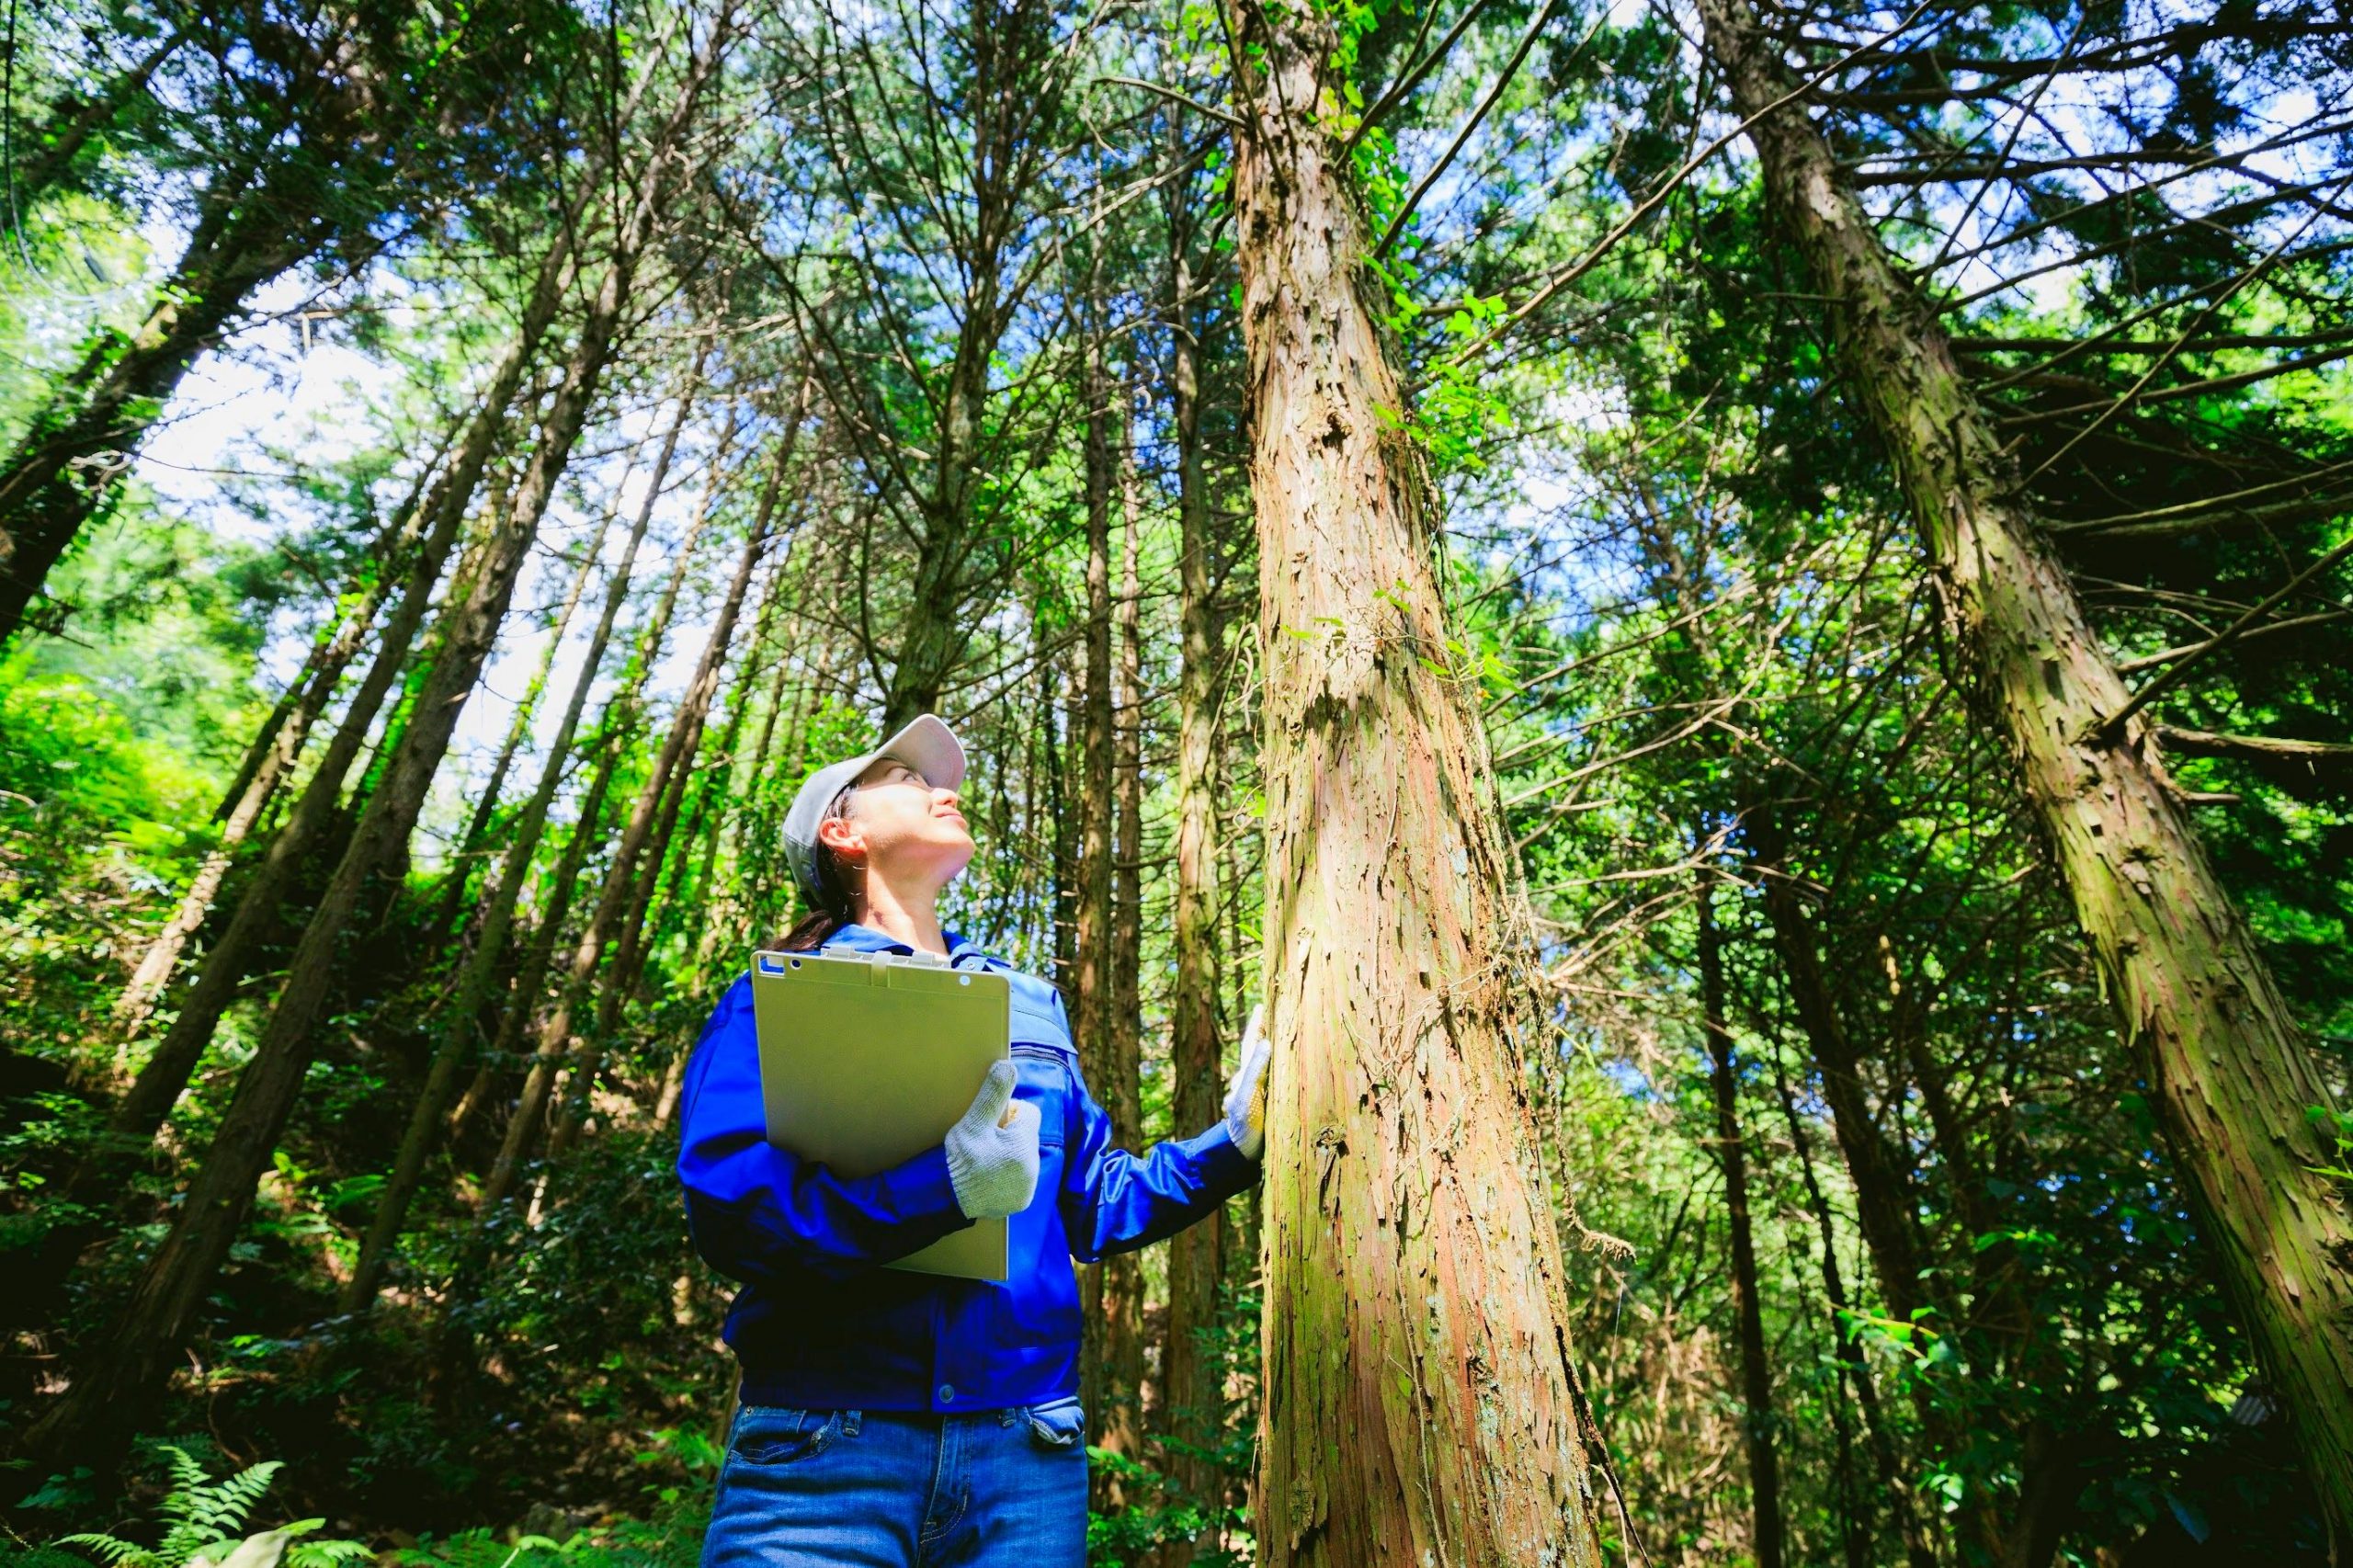 A student looking up at trees in the forest.